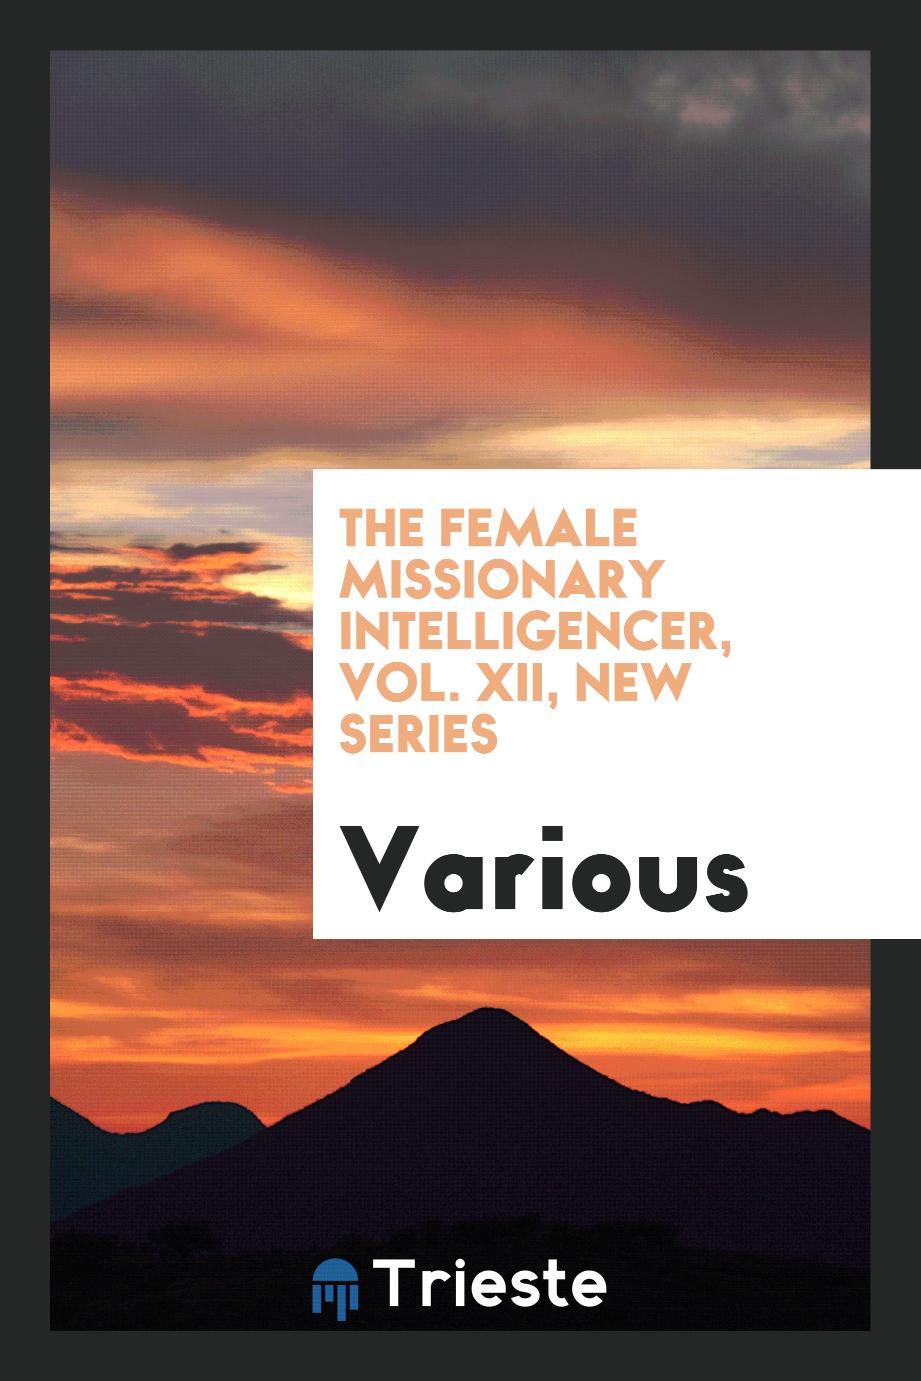 The Female Missionary Intelligencer, Vol. XII, New Series